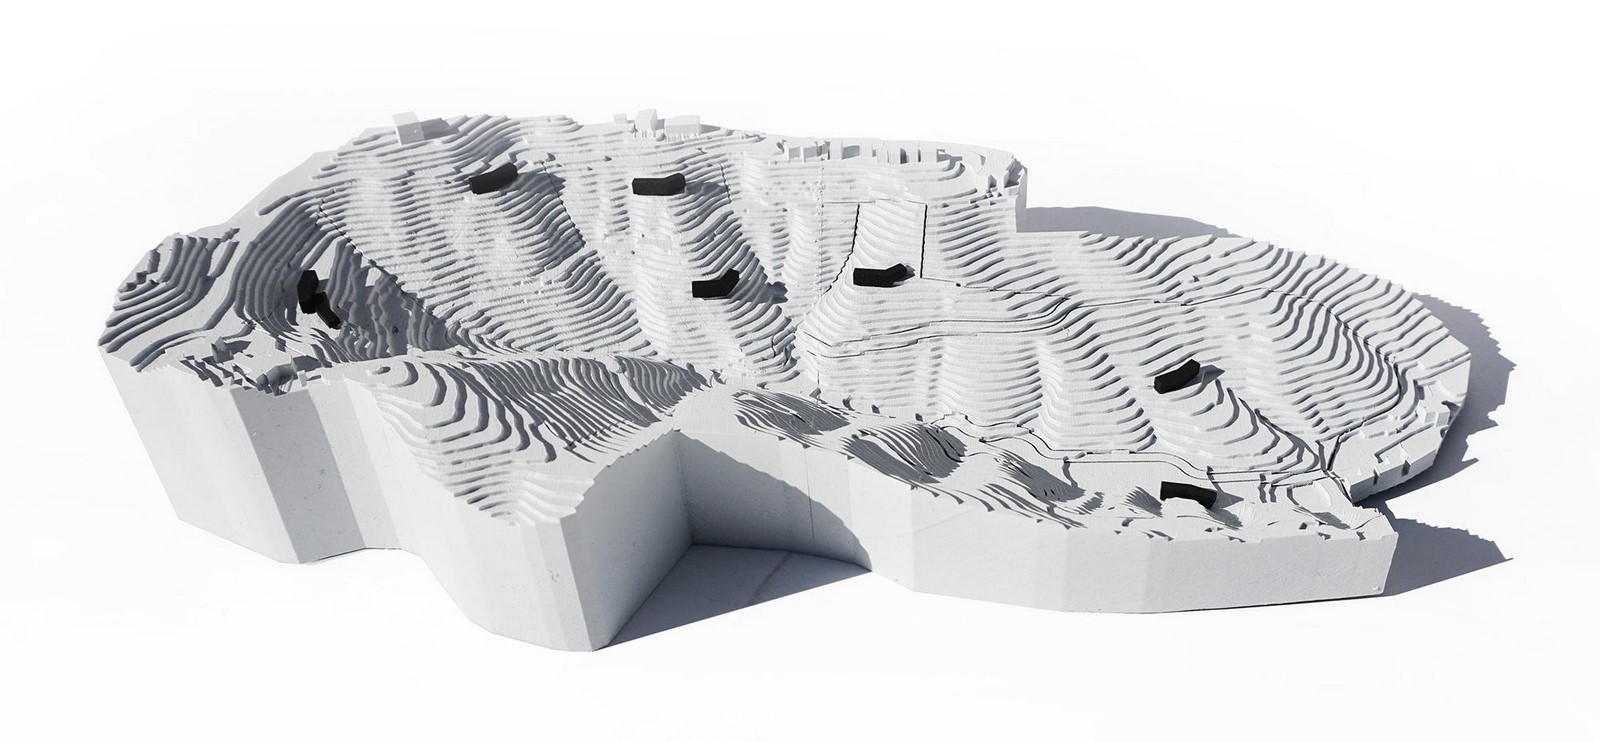 architectural model using layering